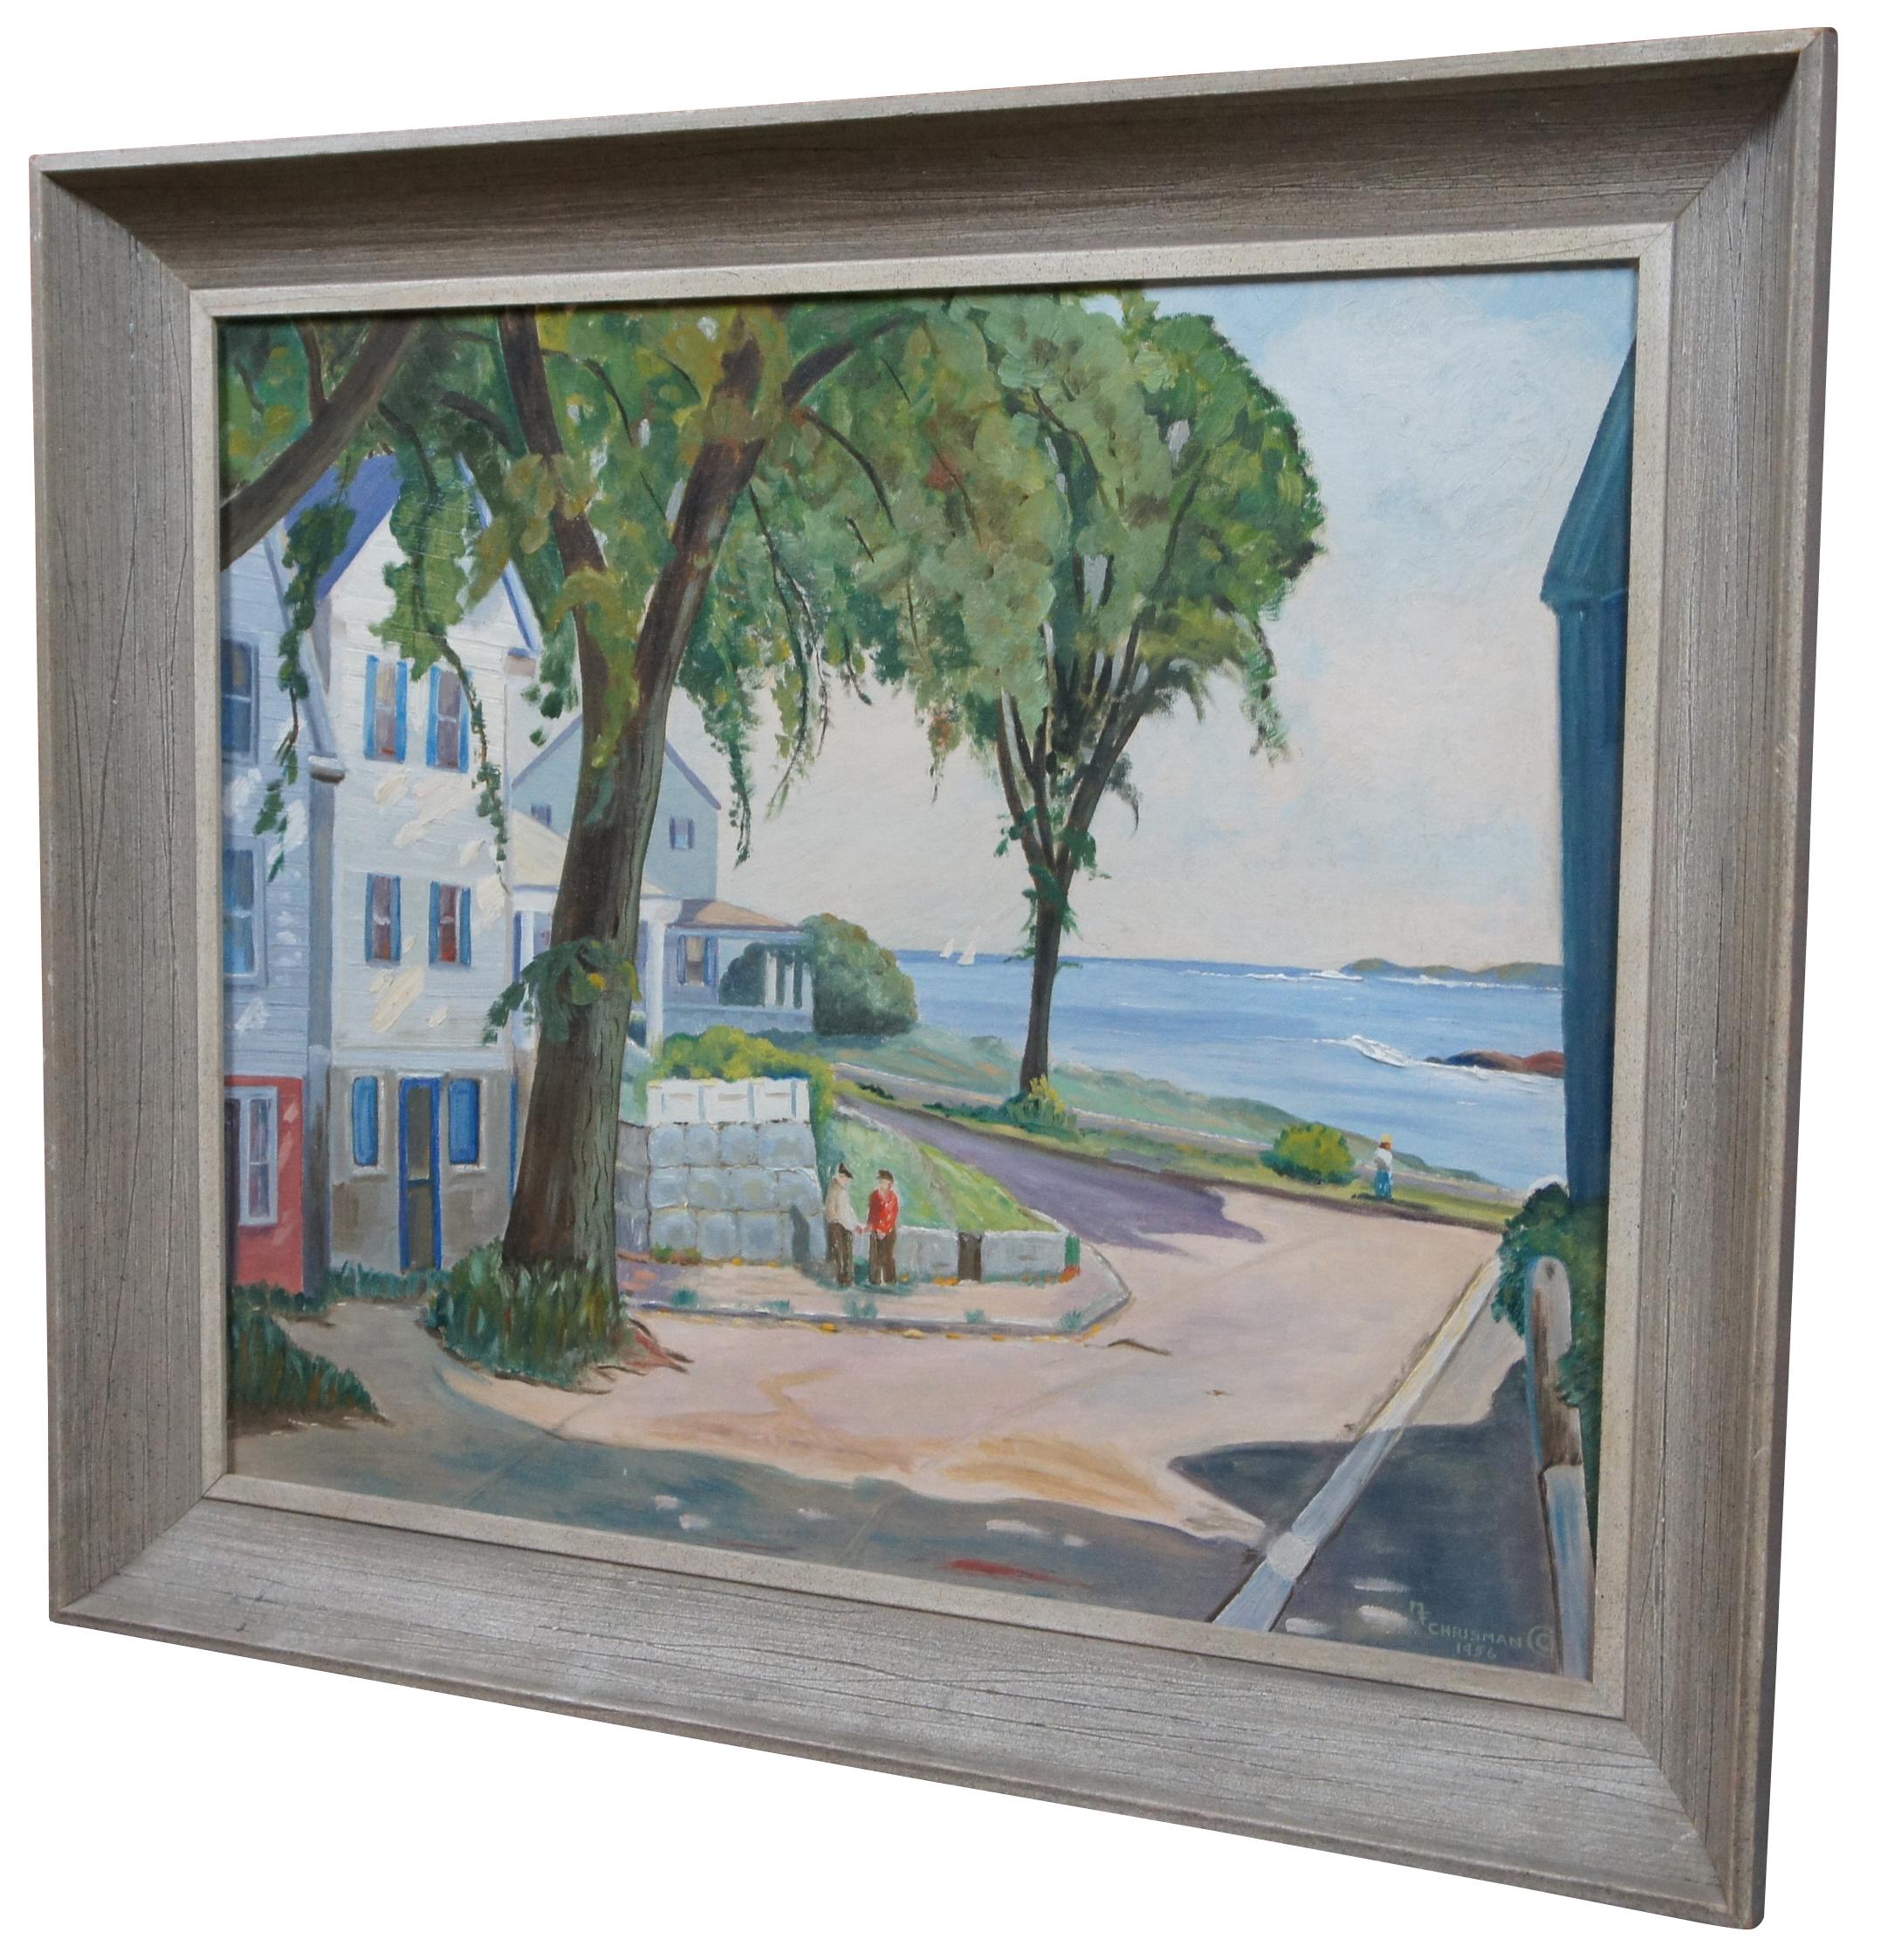 Vintage 1960 oil on canvas board painting by Marifrances Tatlock Chrisman of Dayton, Oh (born 1917), painted from an unidentified Art Institute original resembling an area similar to Nantucket / Massachusettes.

Measures: Sans frame - 23.5” x